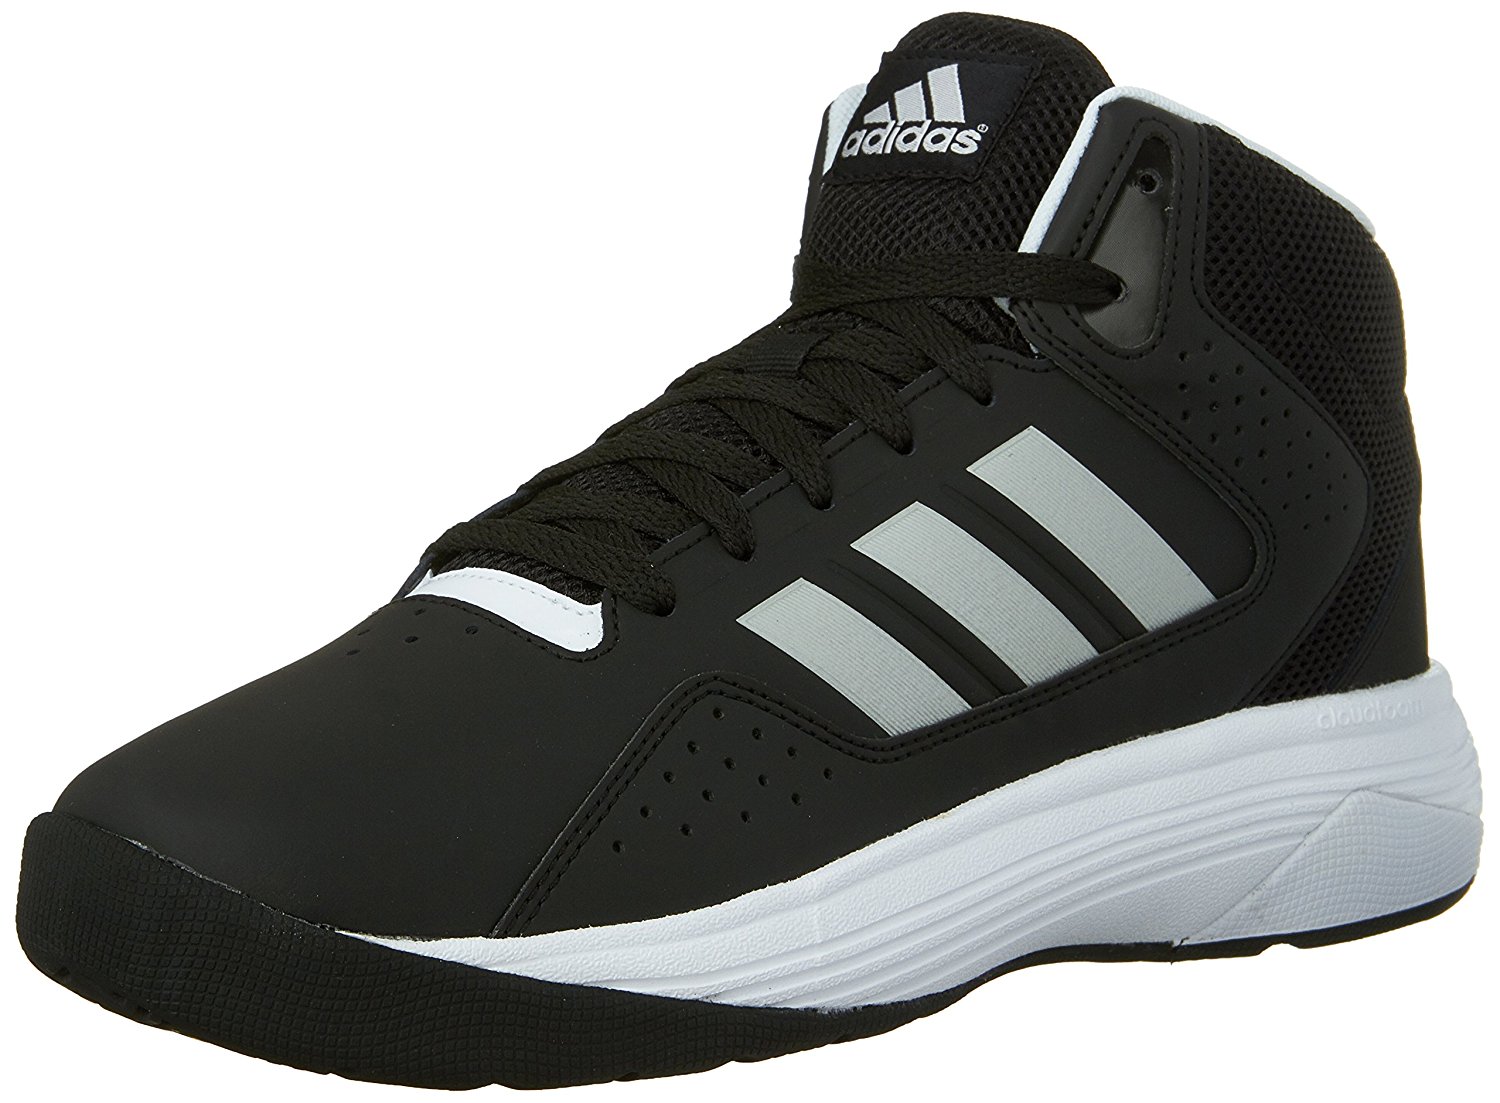 Adidas Cloudfoam Ilation Reviewed for 